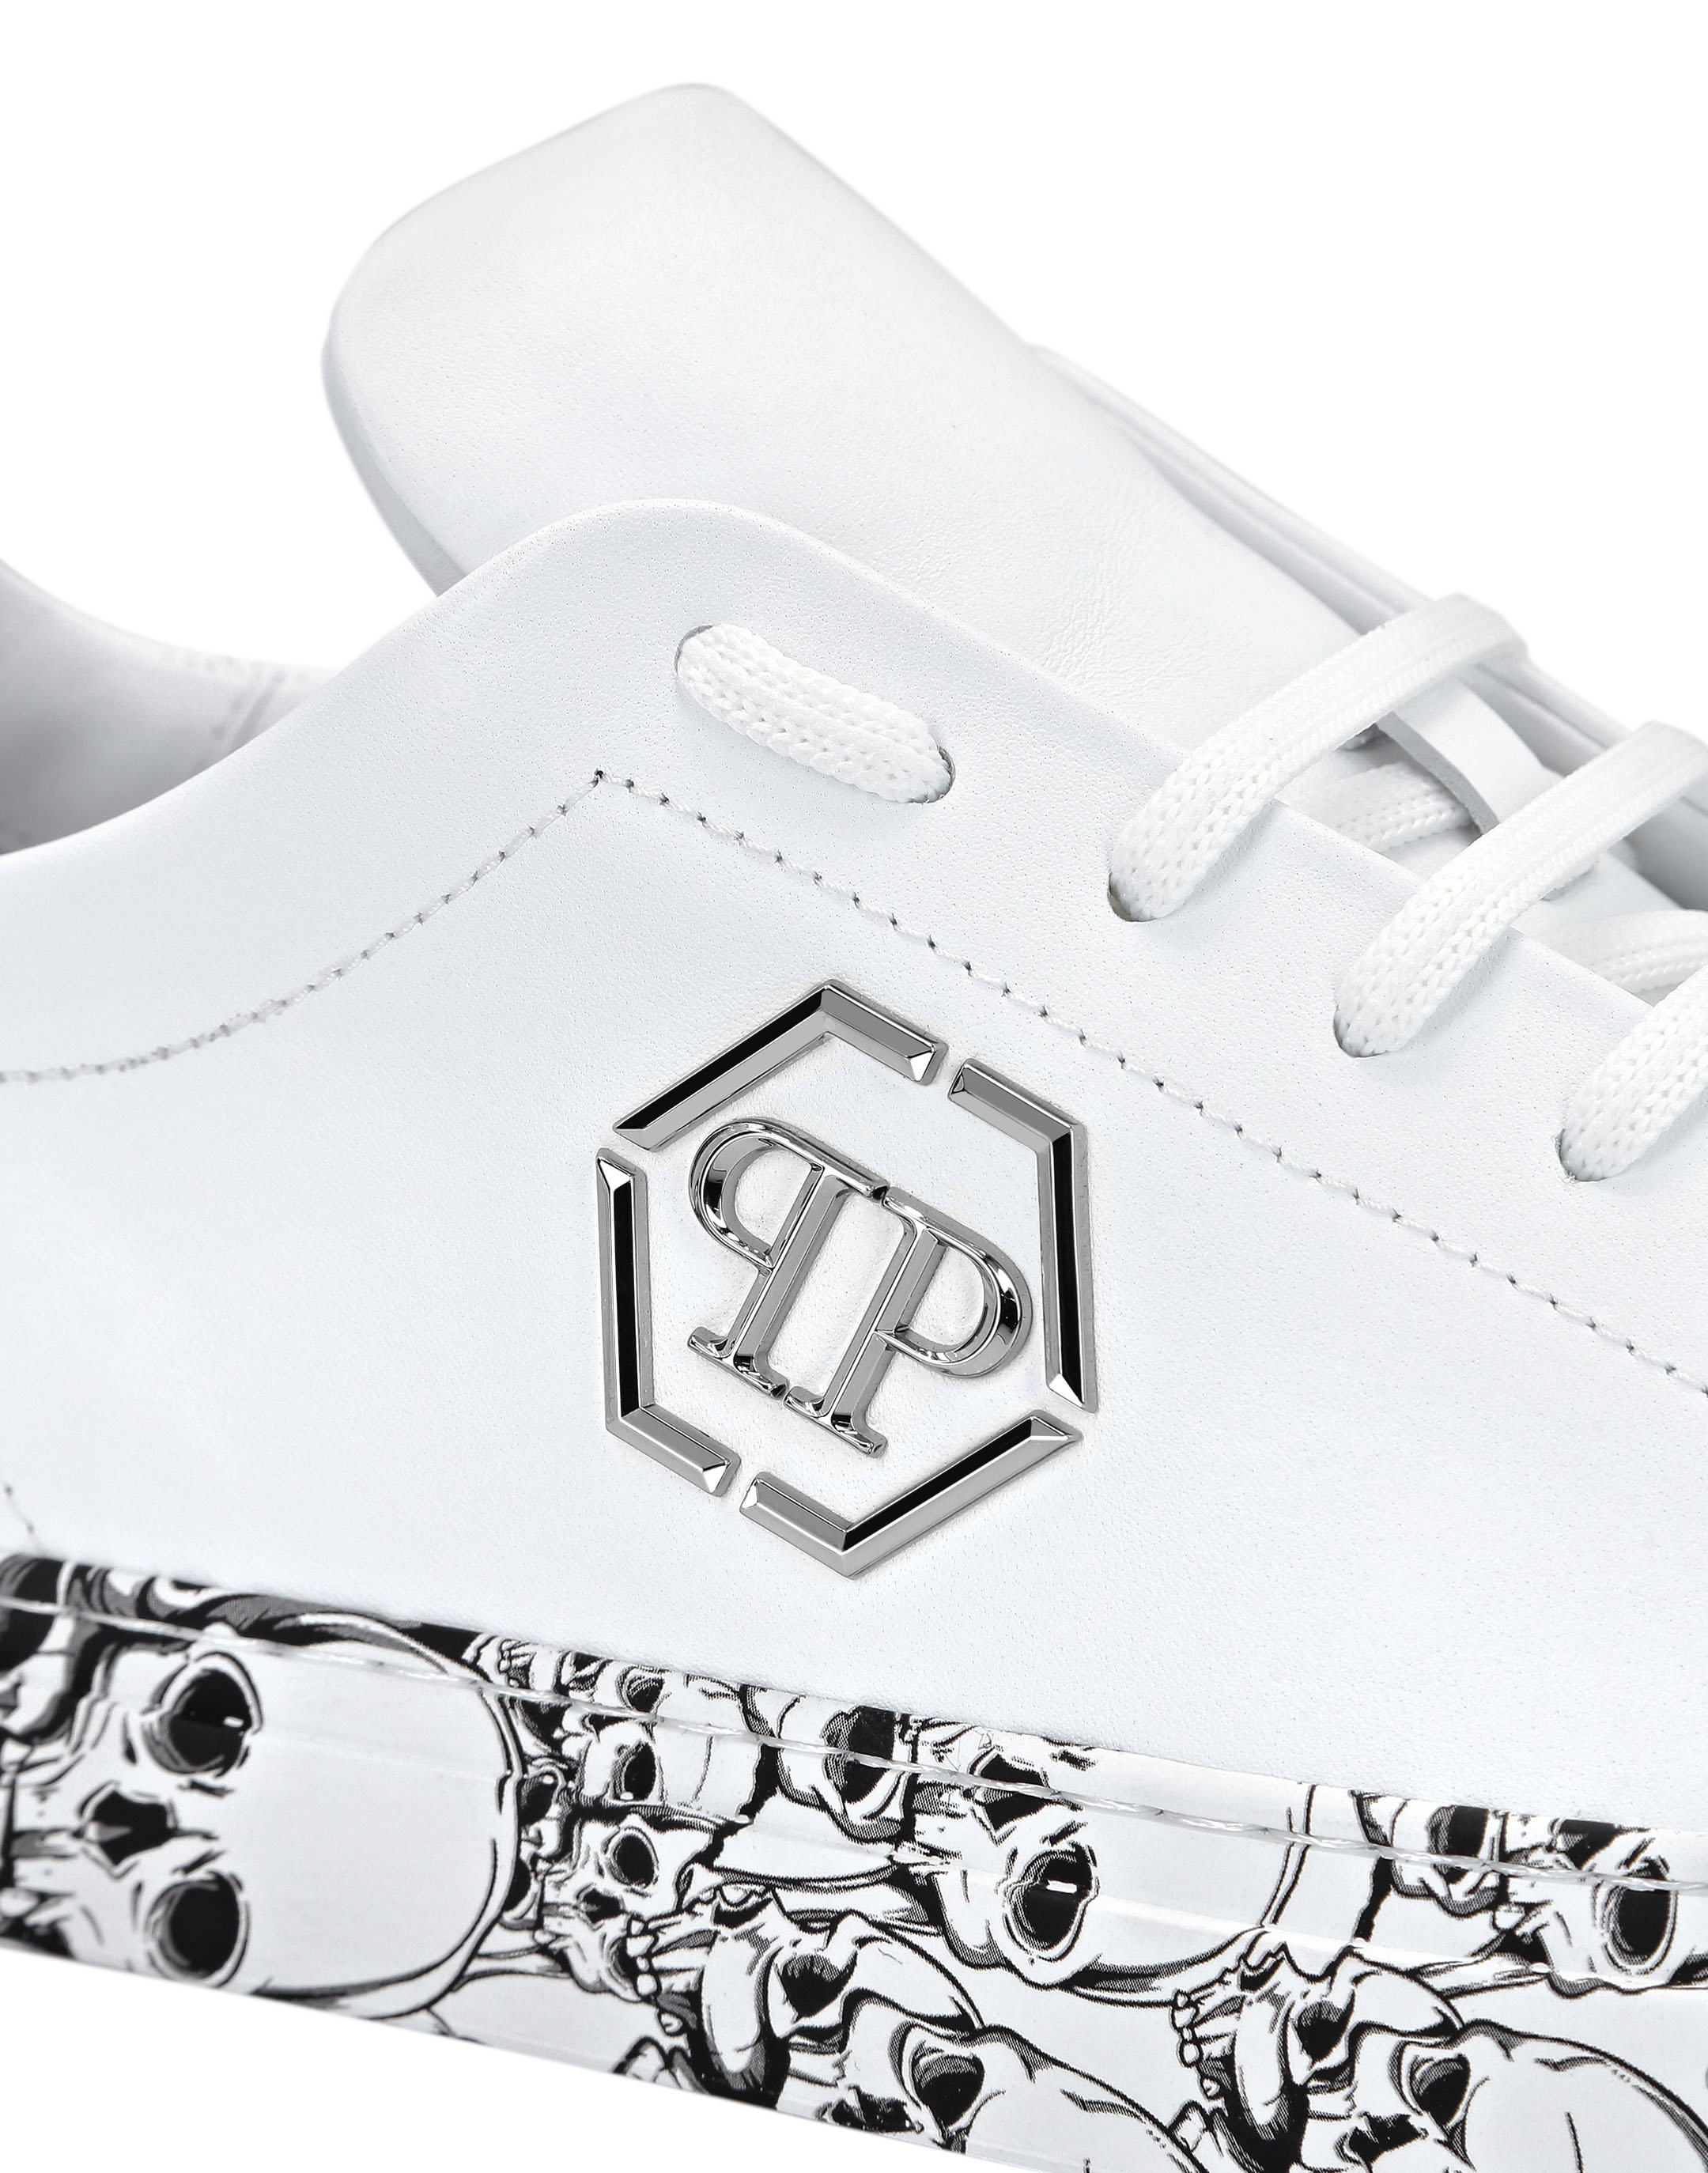 Lo-Top Sneakers hexagon and Skull | Philipp Plein Outlet